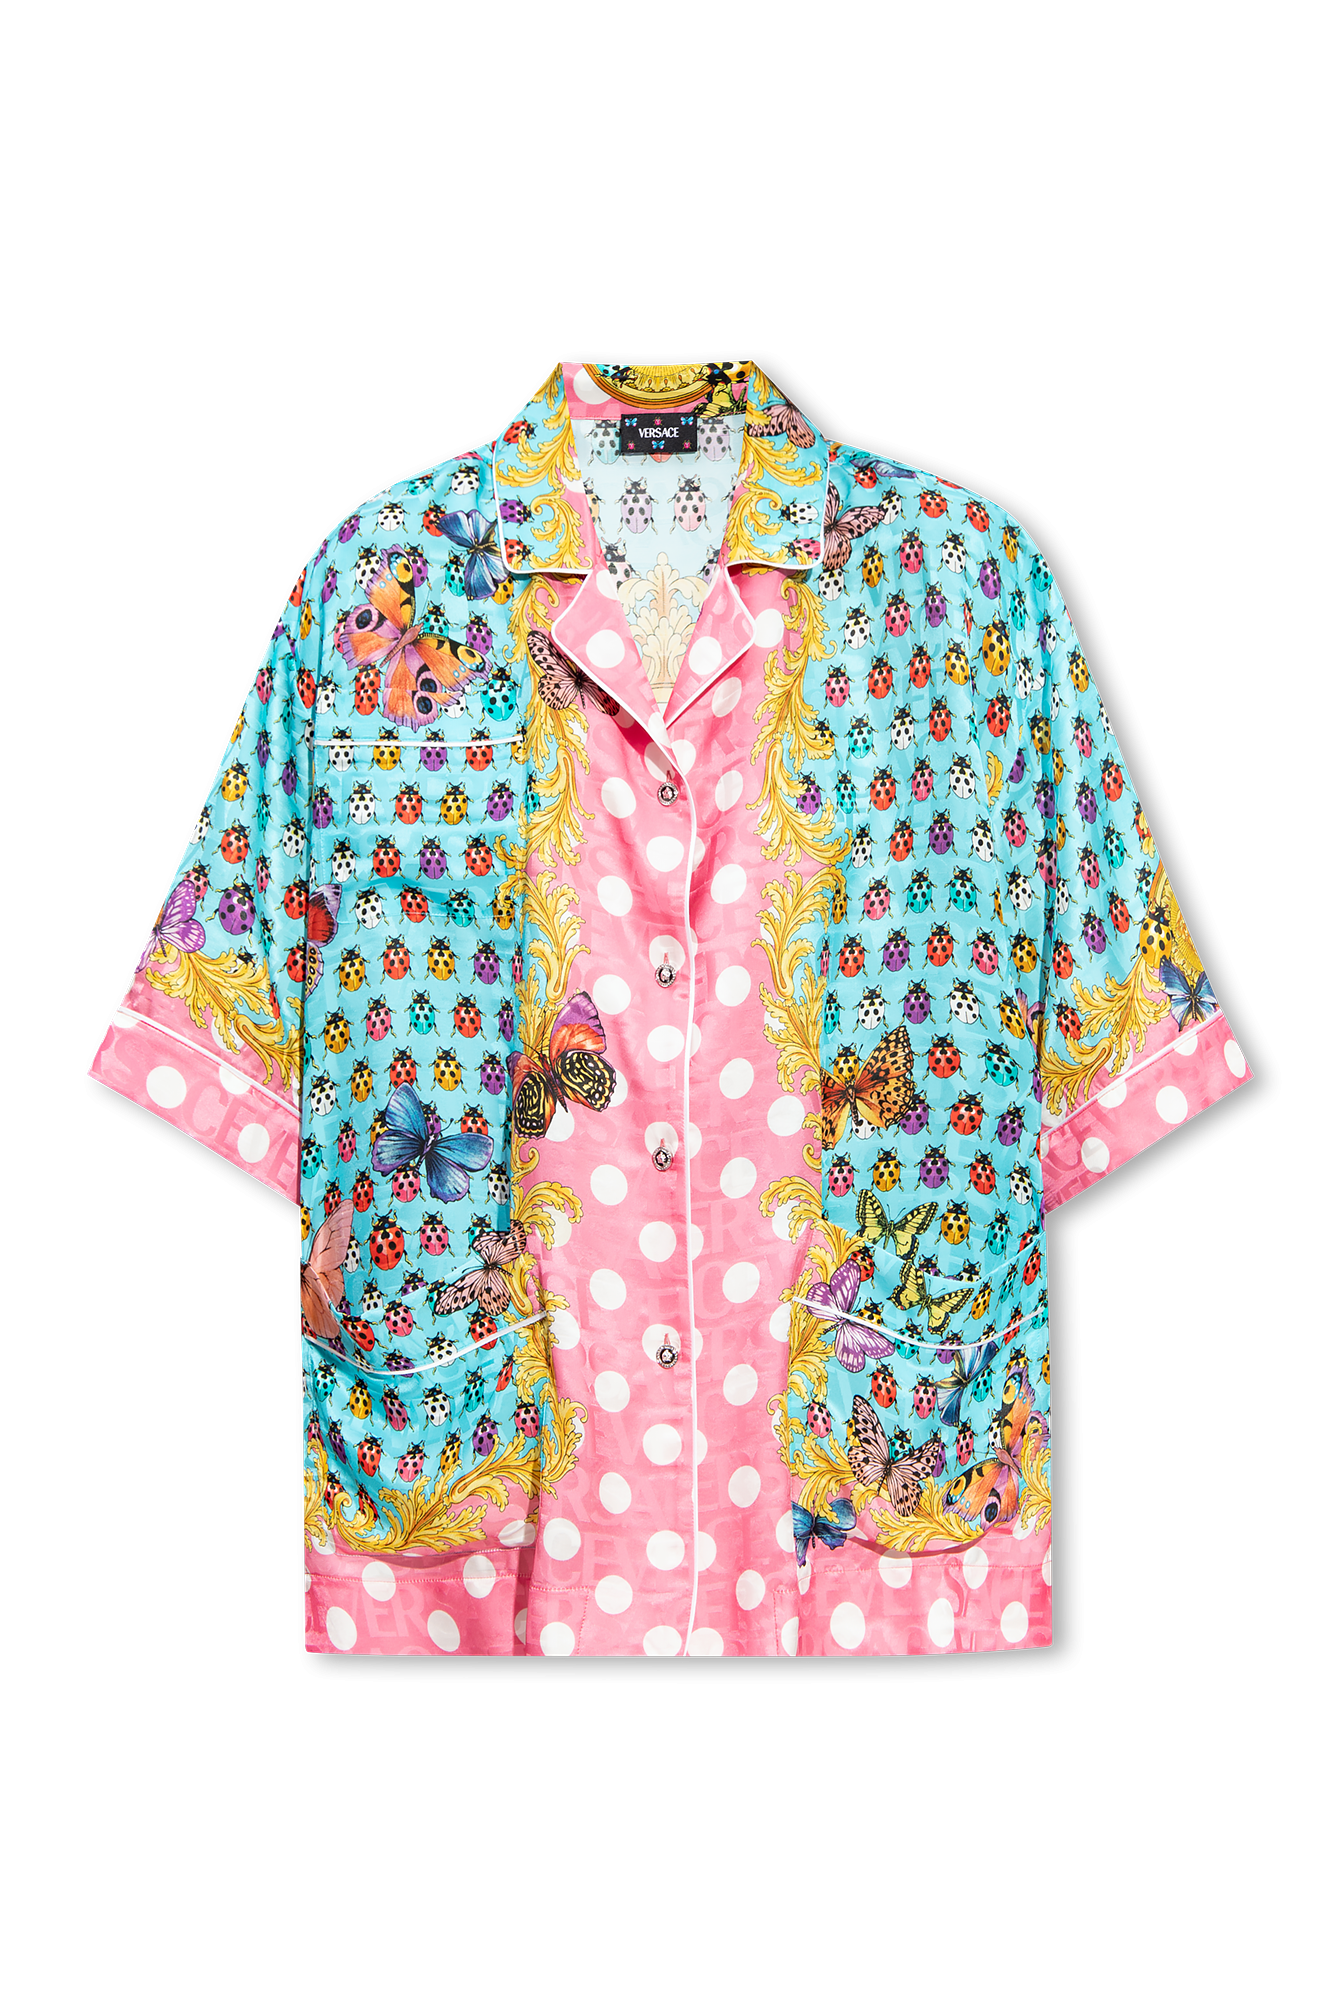 Versace Women's La Vacanza Collection Patterned Shirt